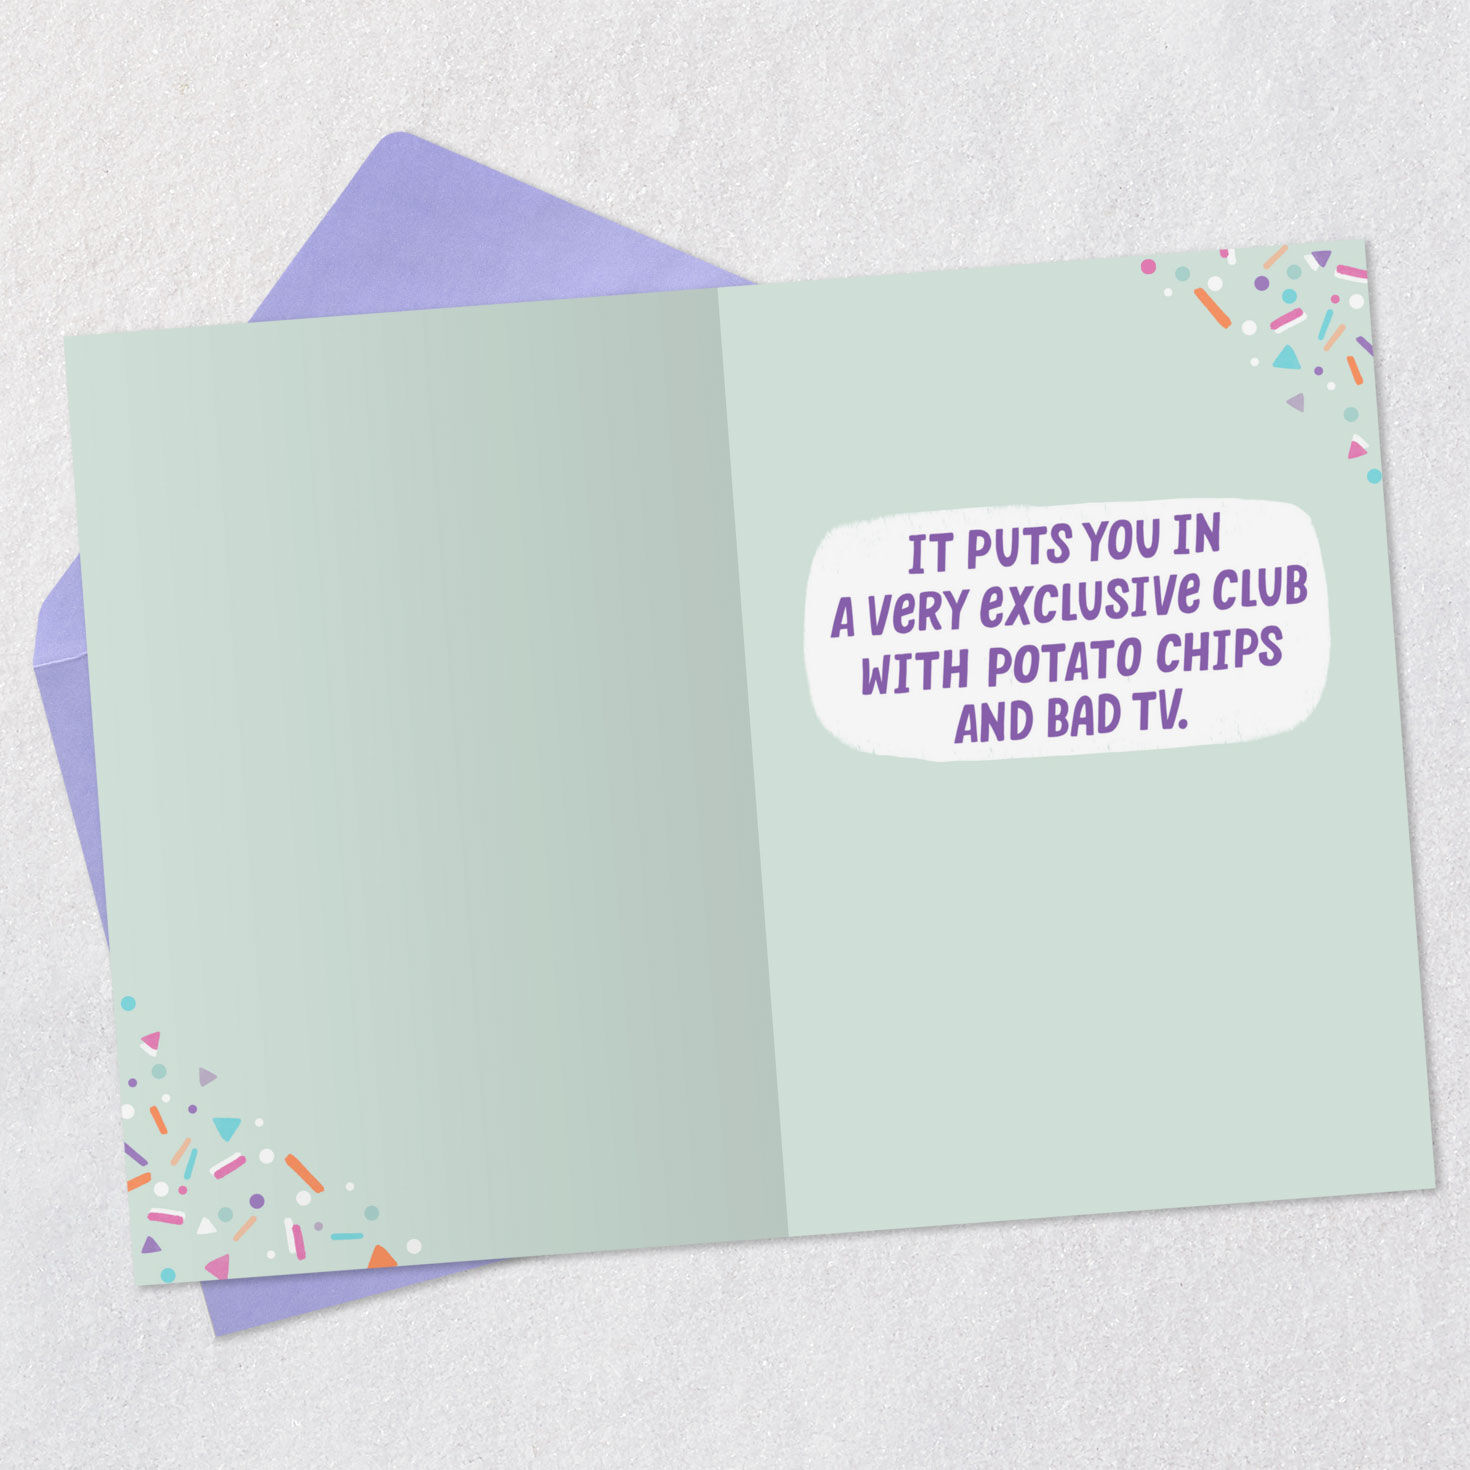 There When I Need You Funny Birthday Card for only USD 3.99 | Hallmark